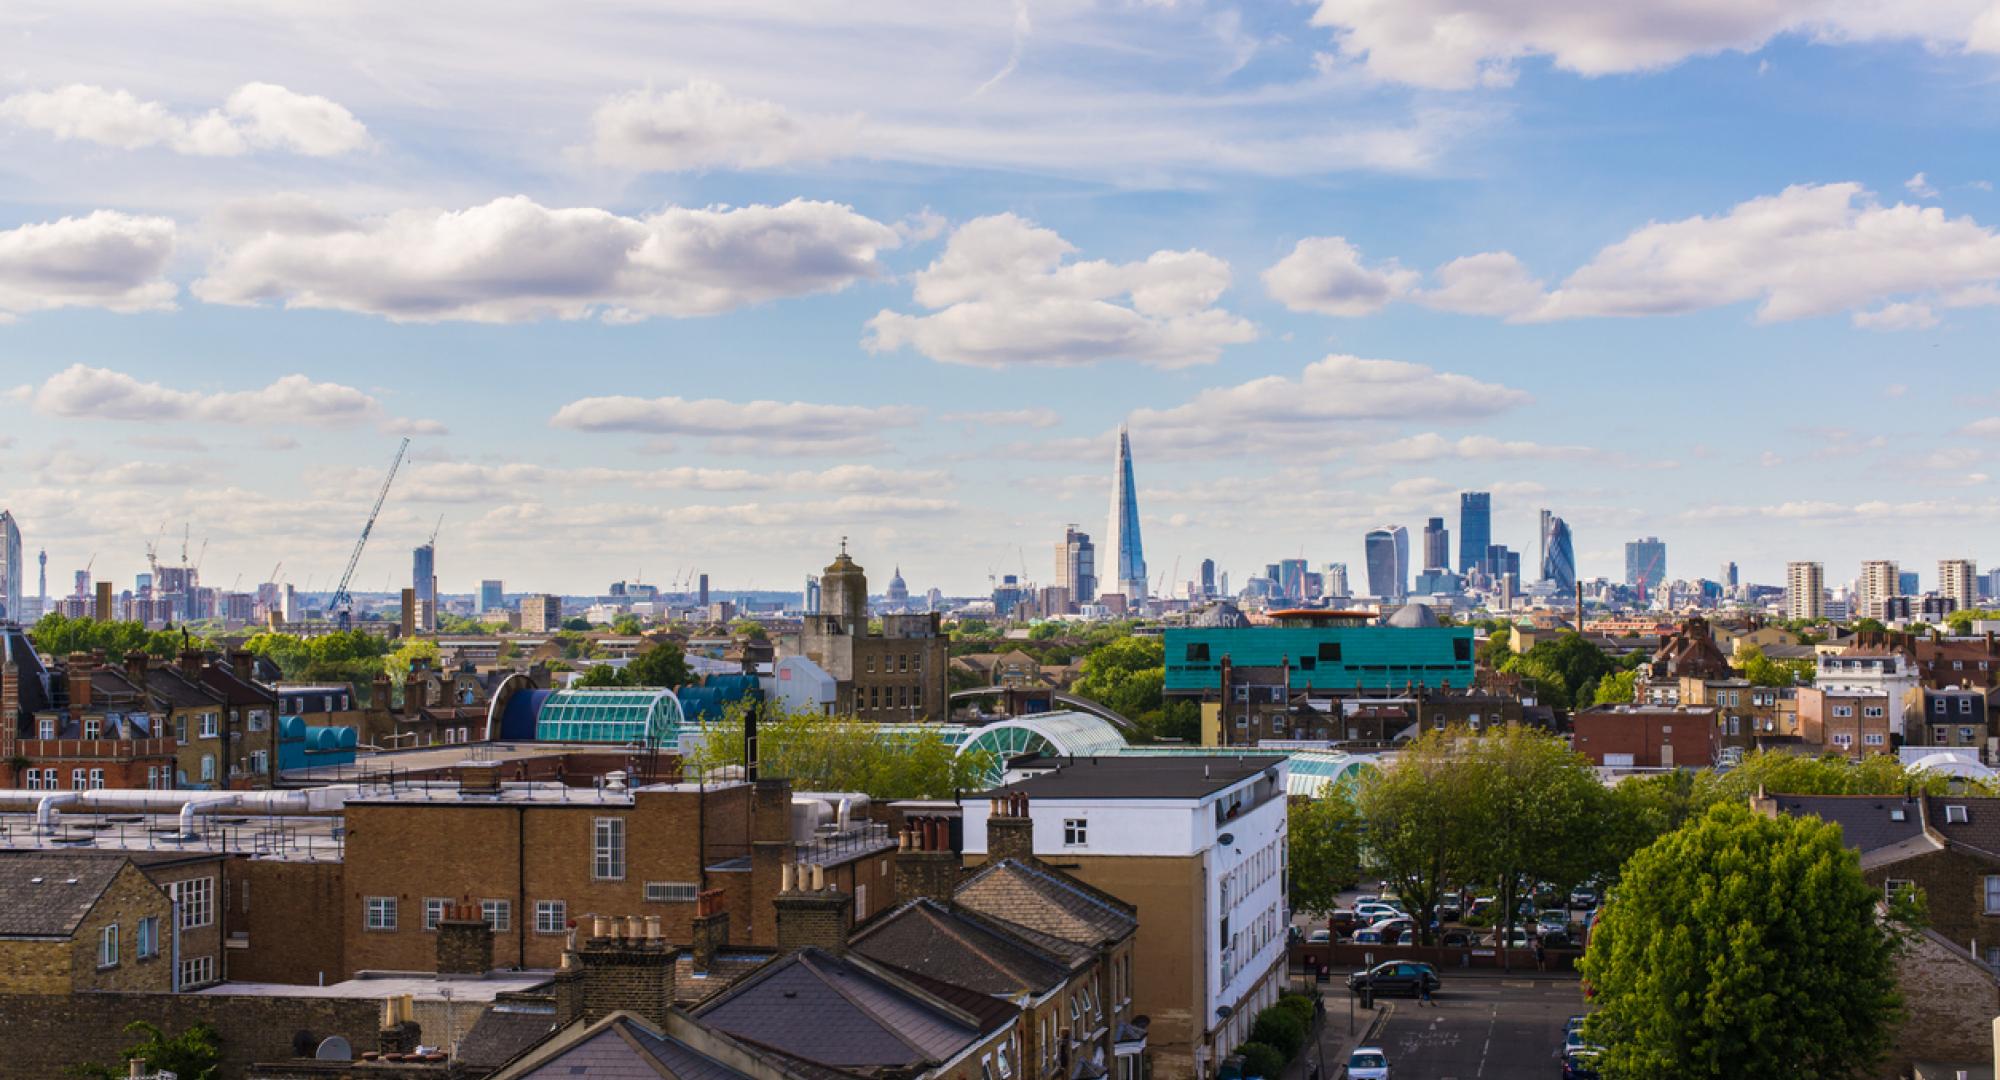 Residential area with flats in south London with a view of the city of London and its most iconic skyscrapers